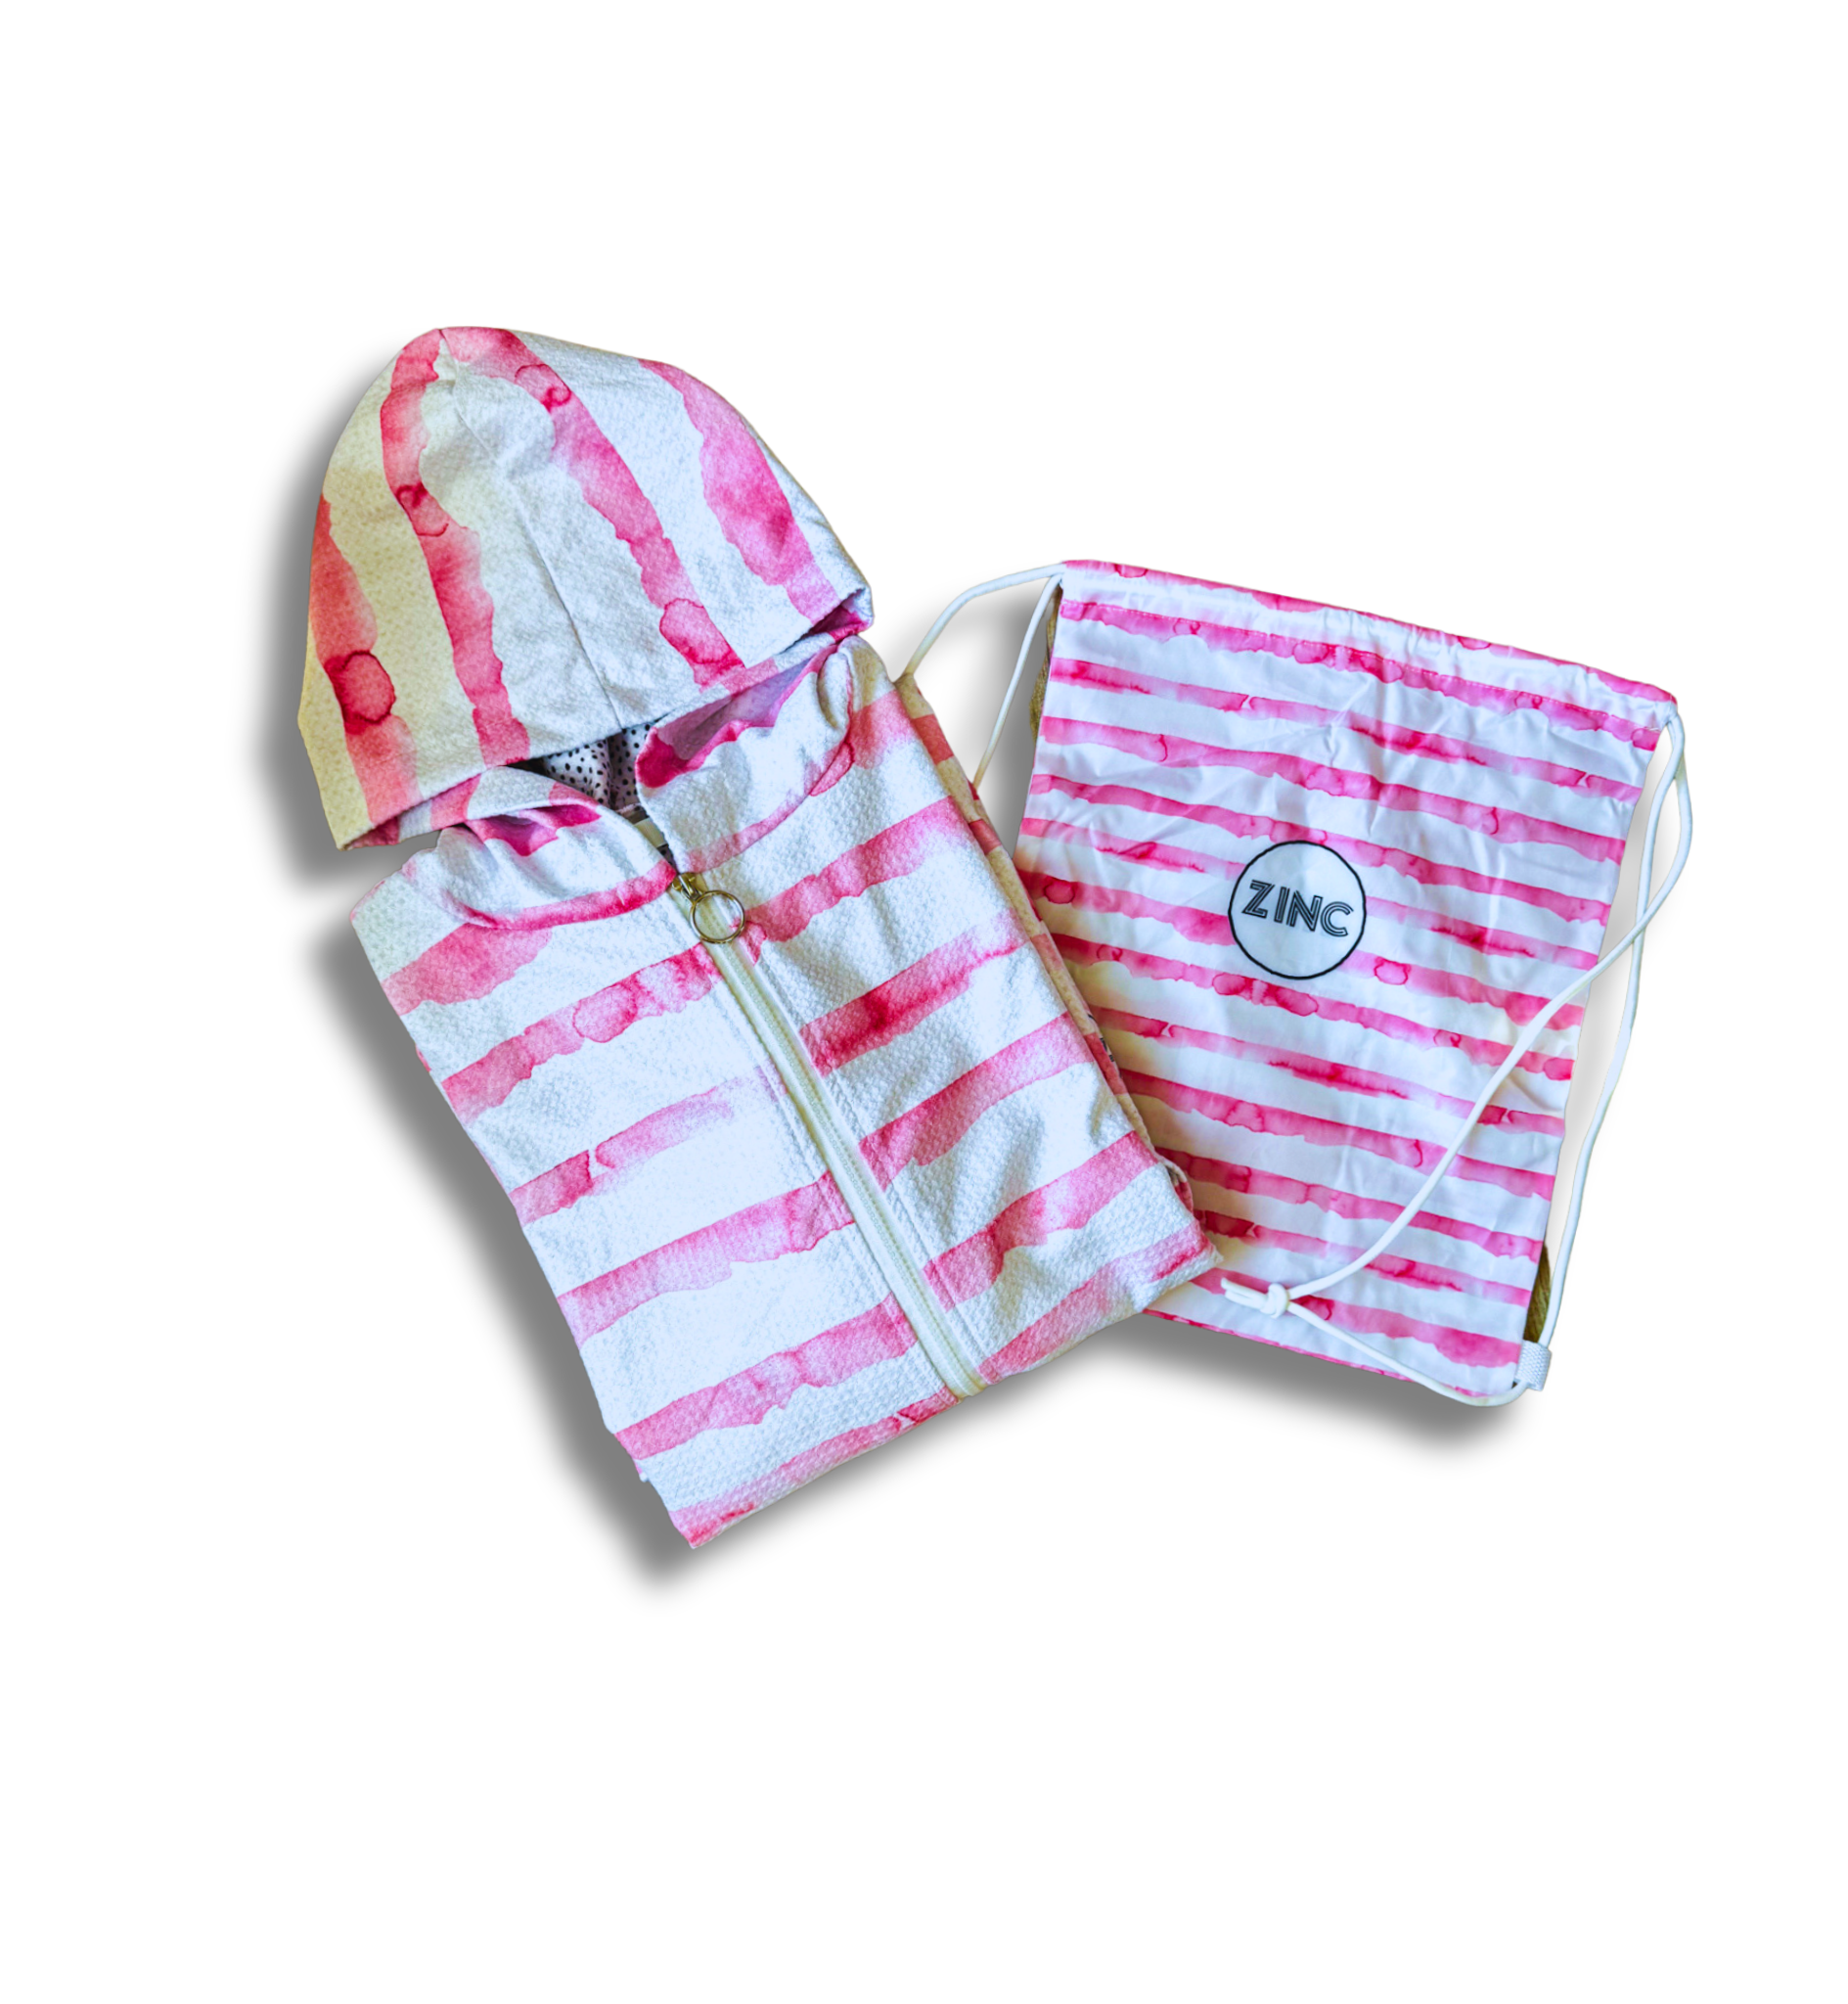 X-Small Zip Up Hooded Towel - French Beach Pink